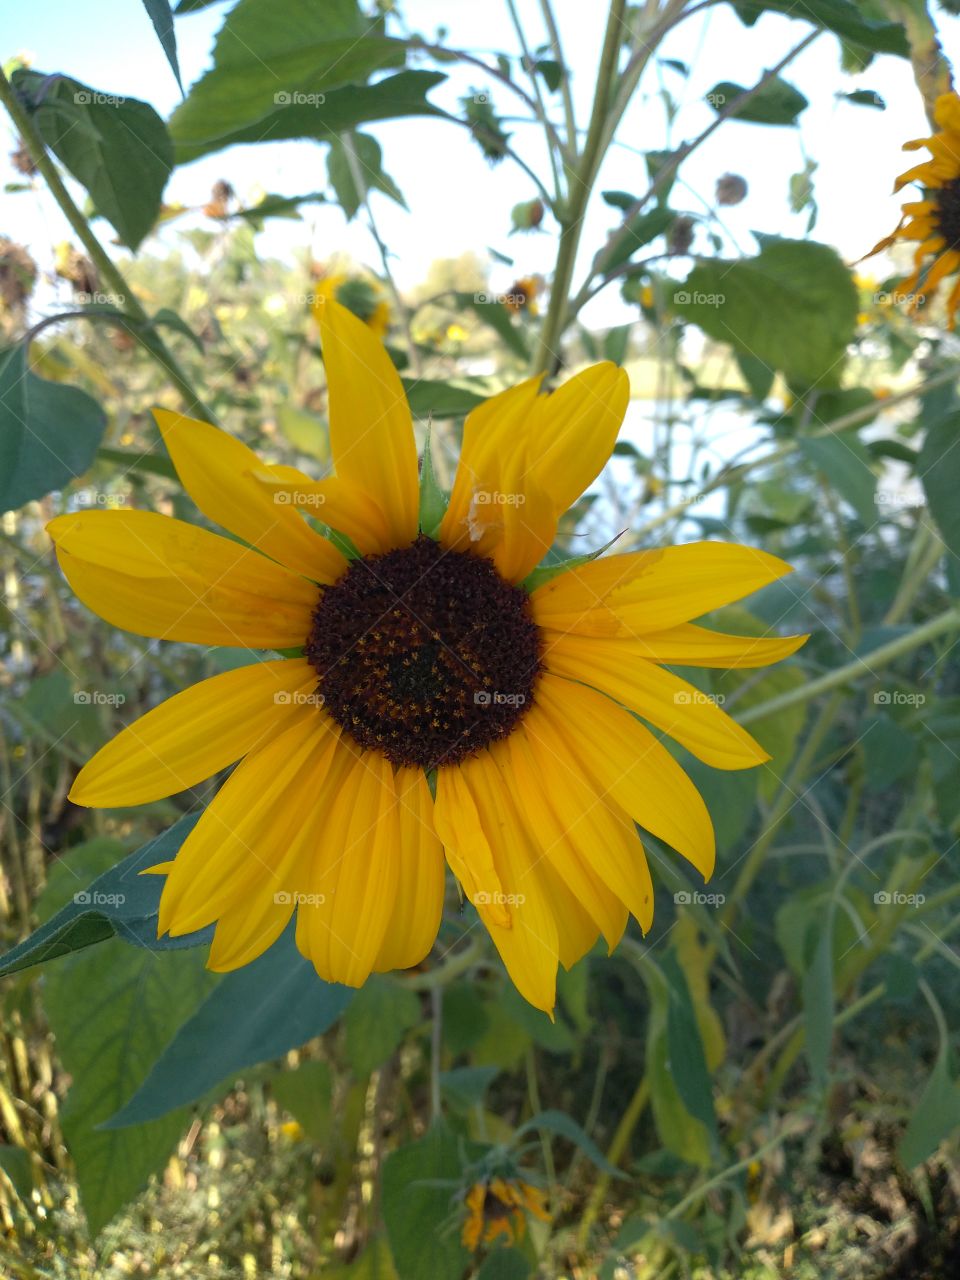 Sunflower in the Park